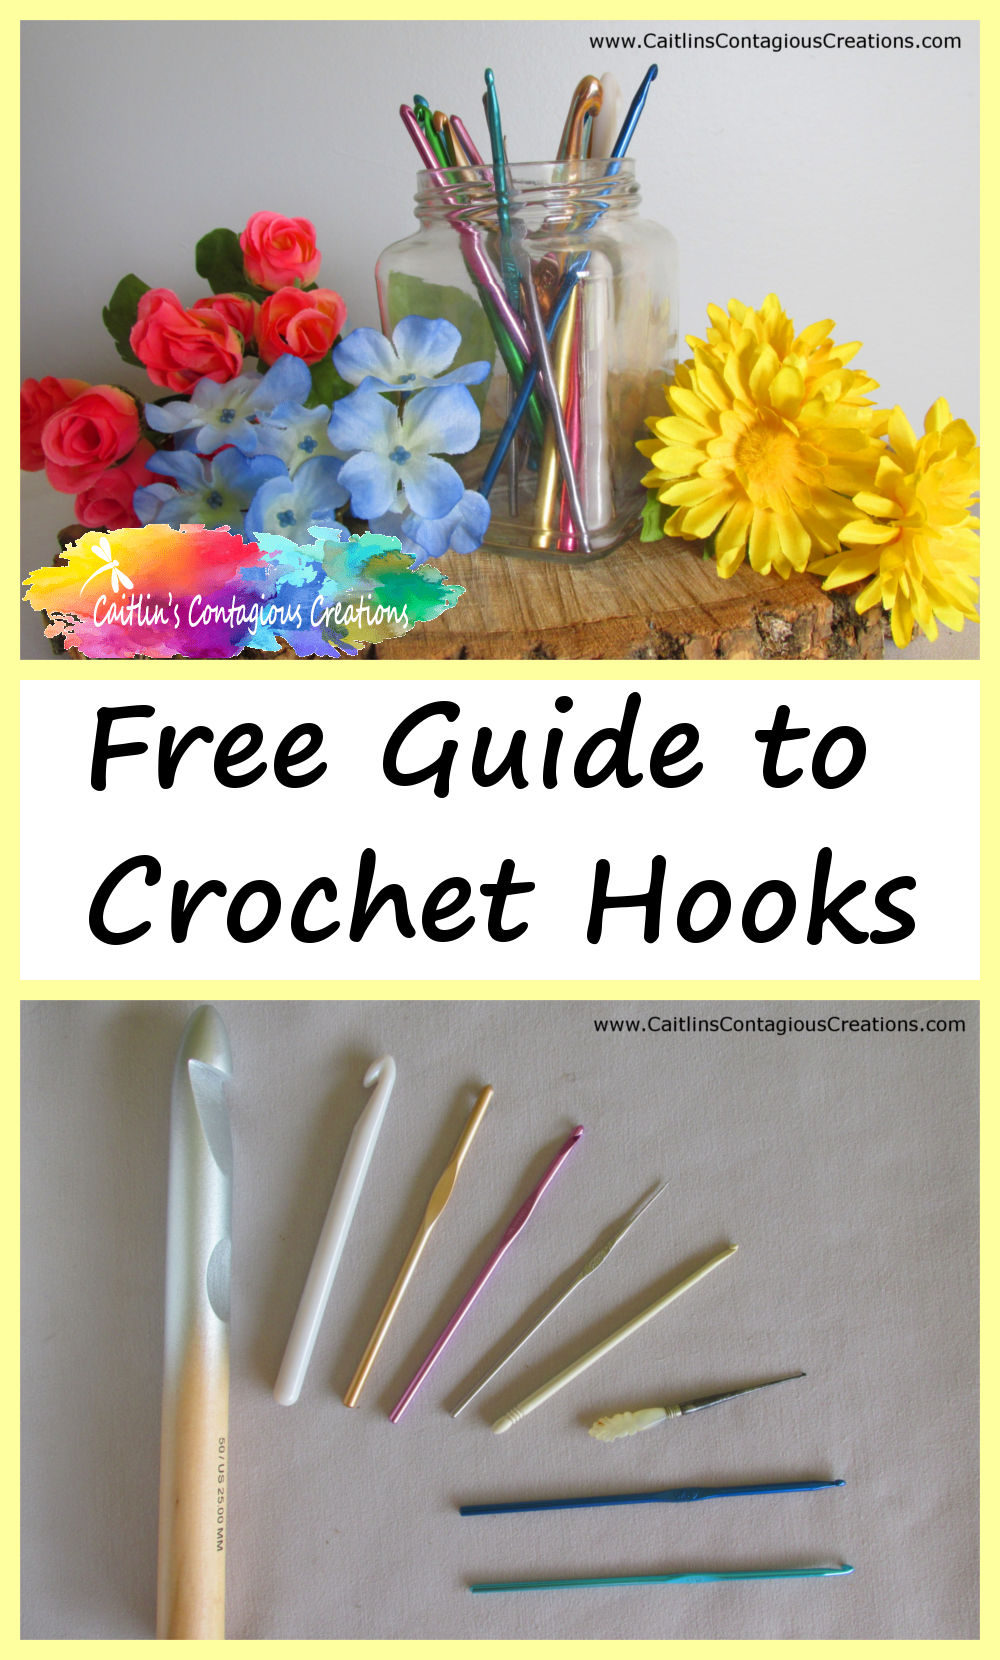 multiple types of crochet hooks arranged in pleasing formation with floral arrangement with text overlay